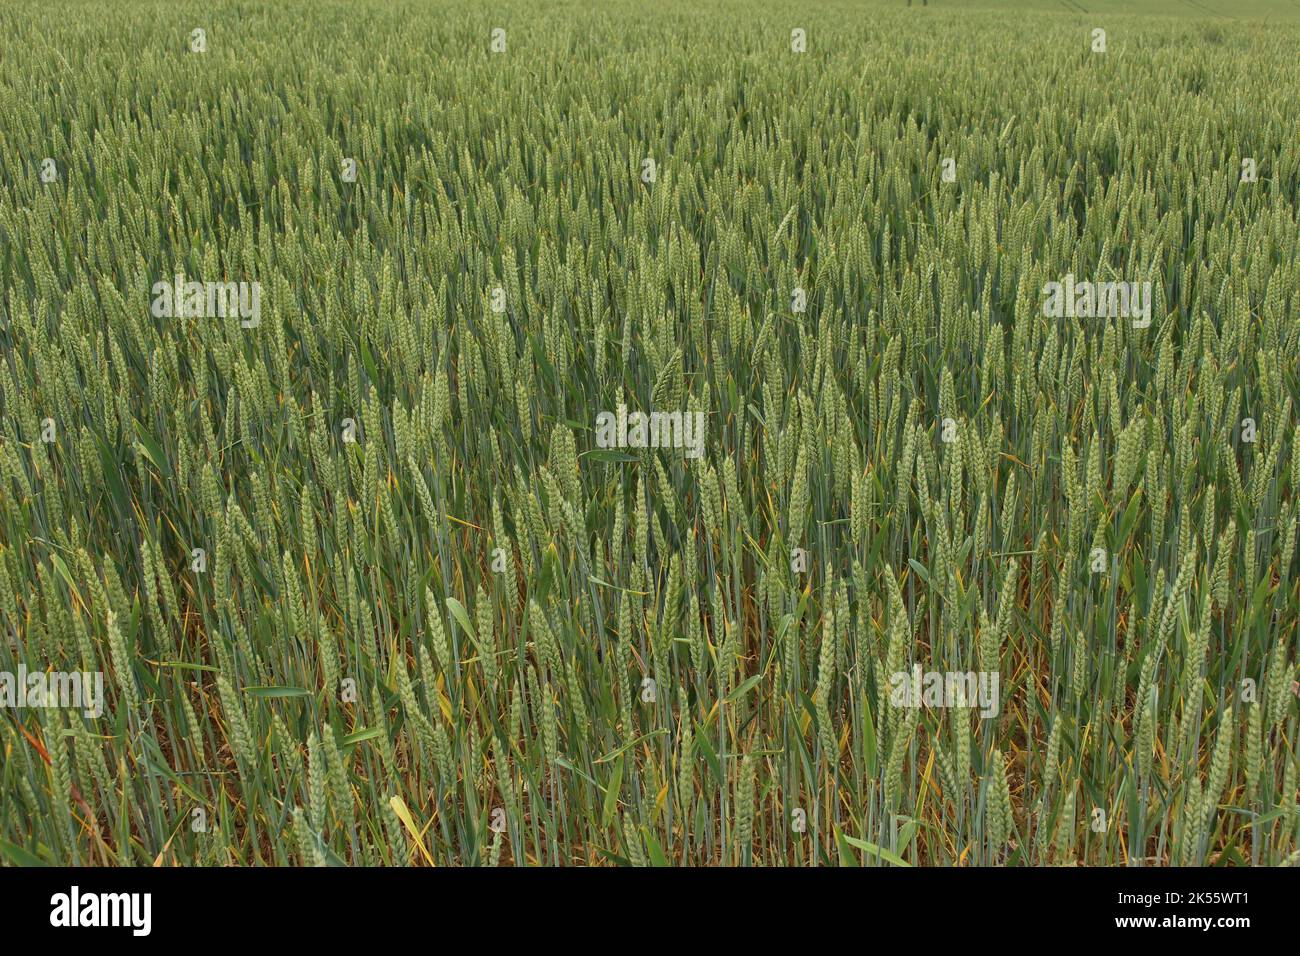 Green wheat field texture. Field of young, newly planted green cereals. Concept for life, agriculture, farming, food security, harvest, growing cereal Stock Photo